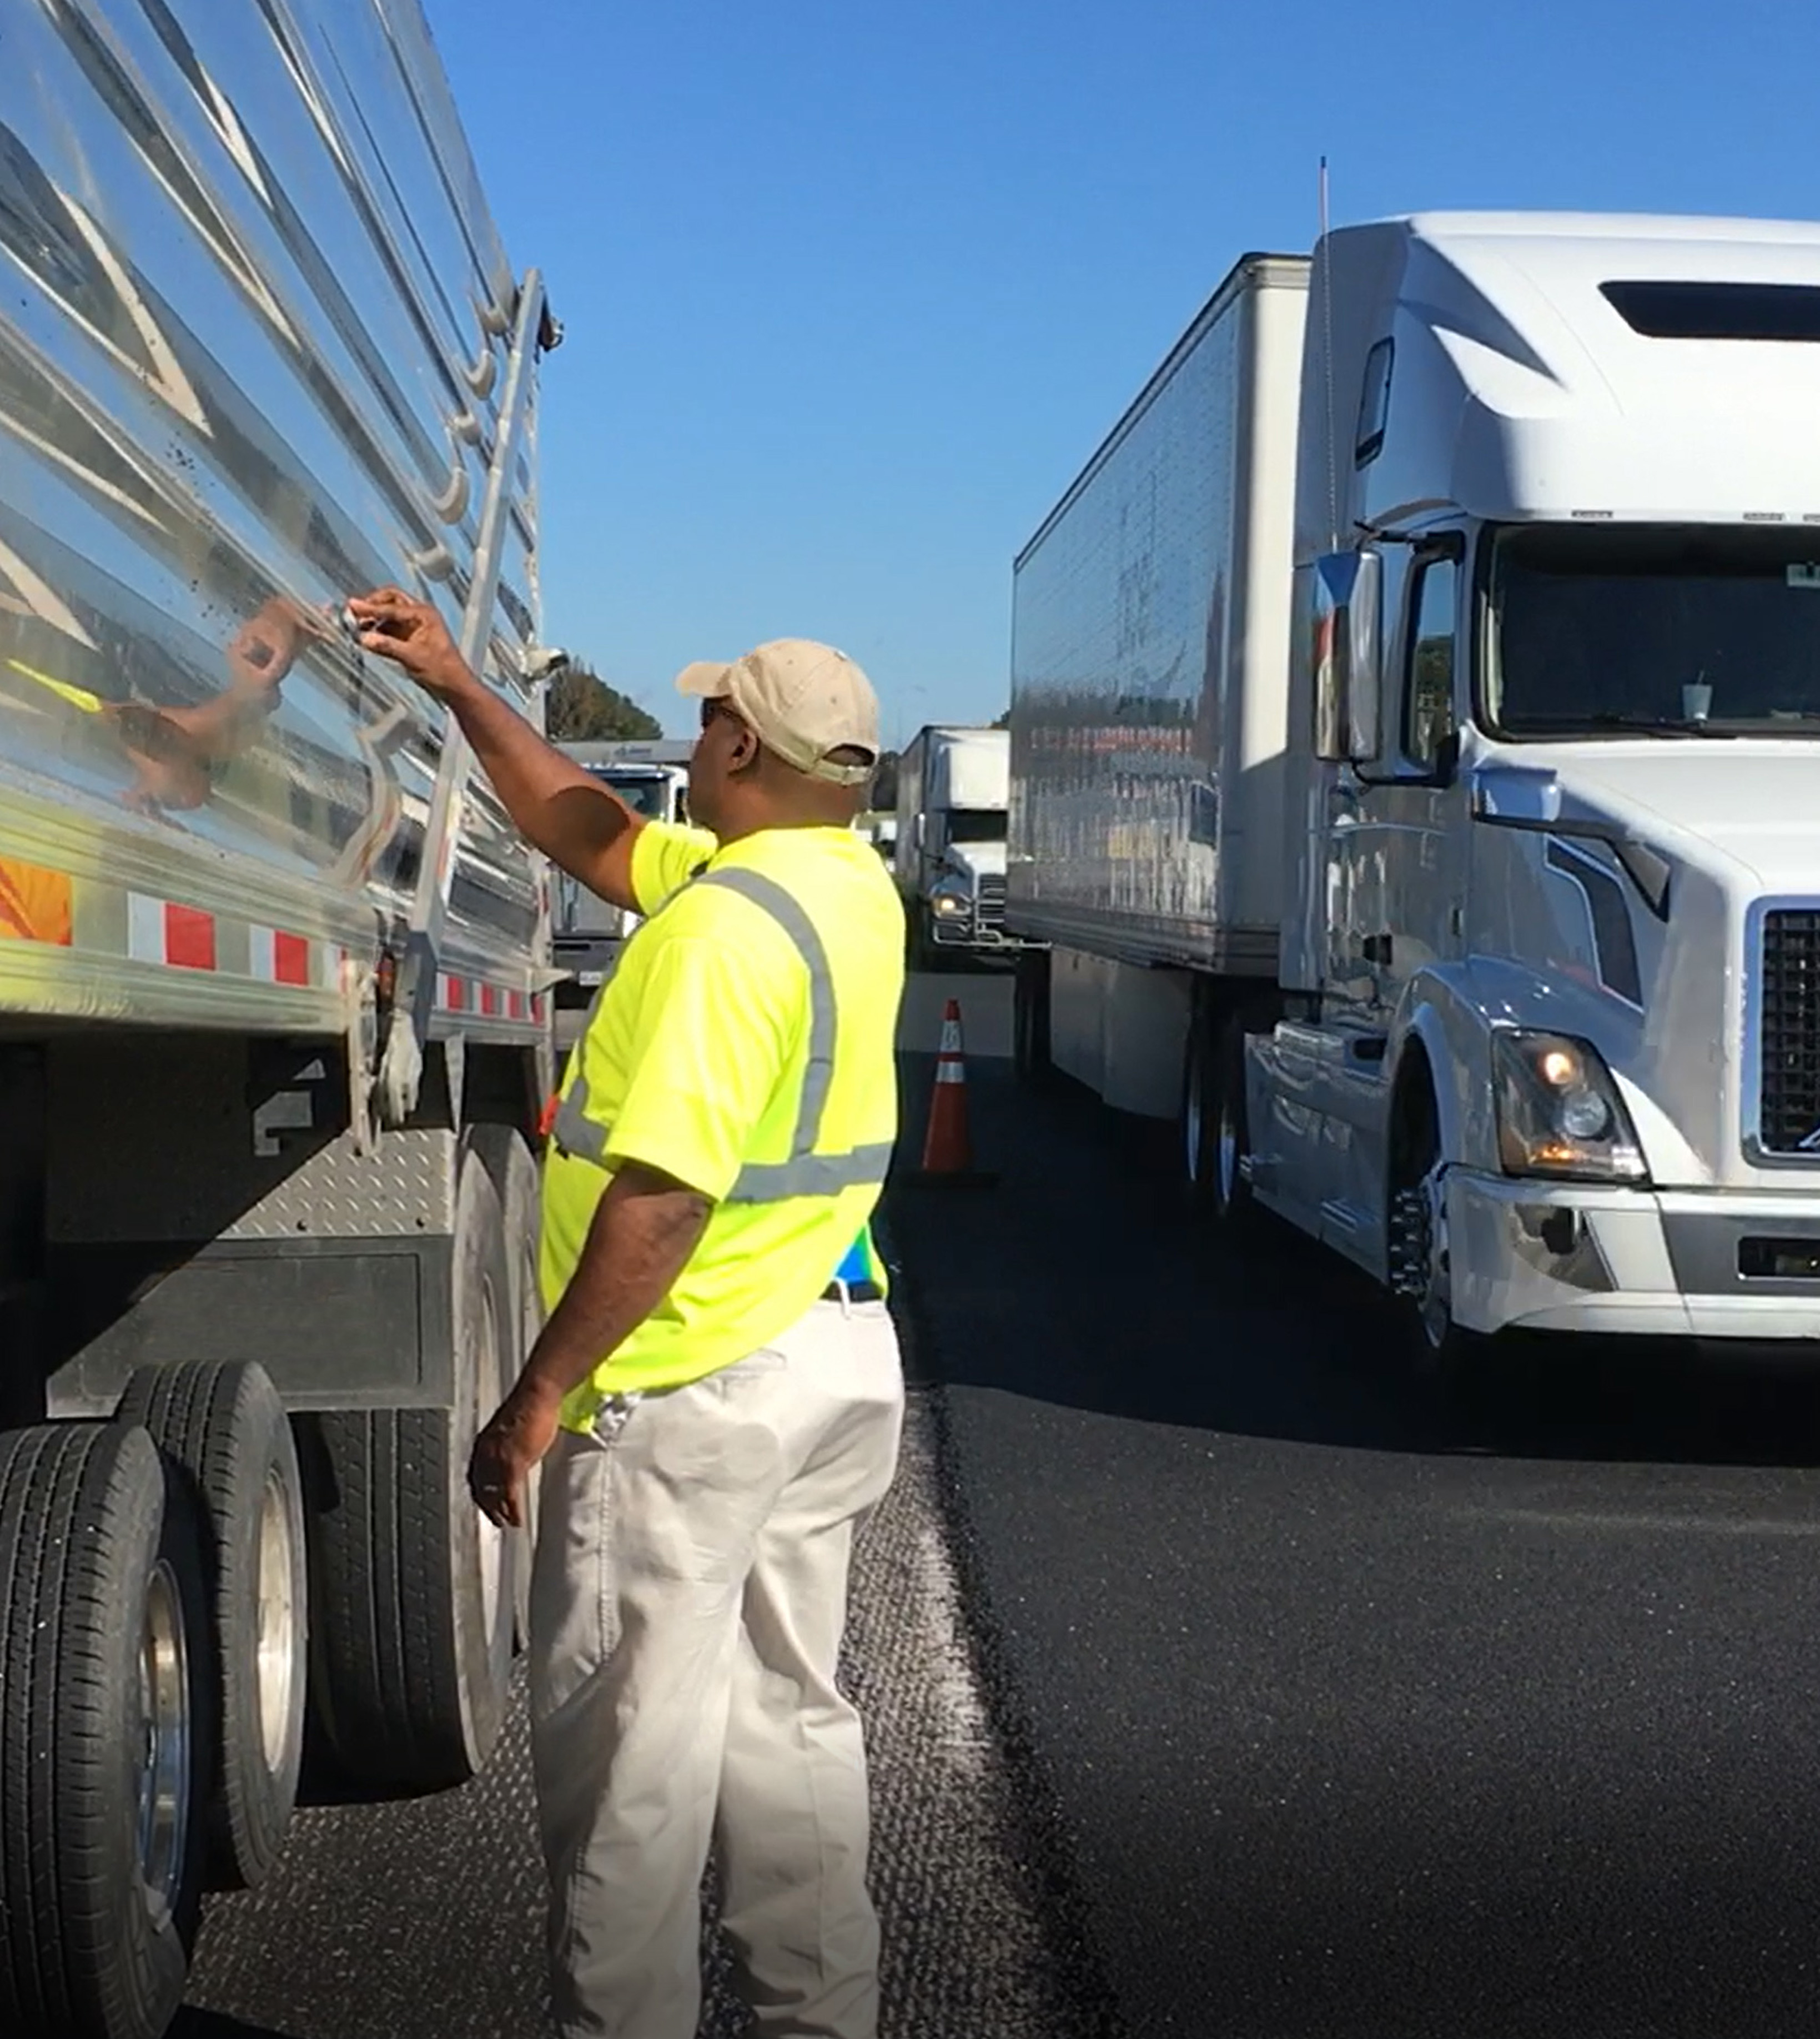 A man on a roadside standing next to a dump truck with several semi trucks approaching on the road next to him.